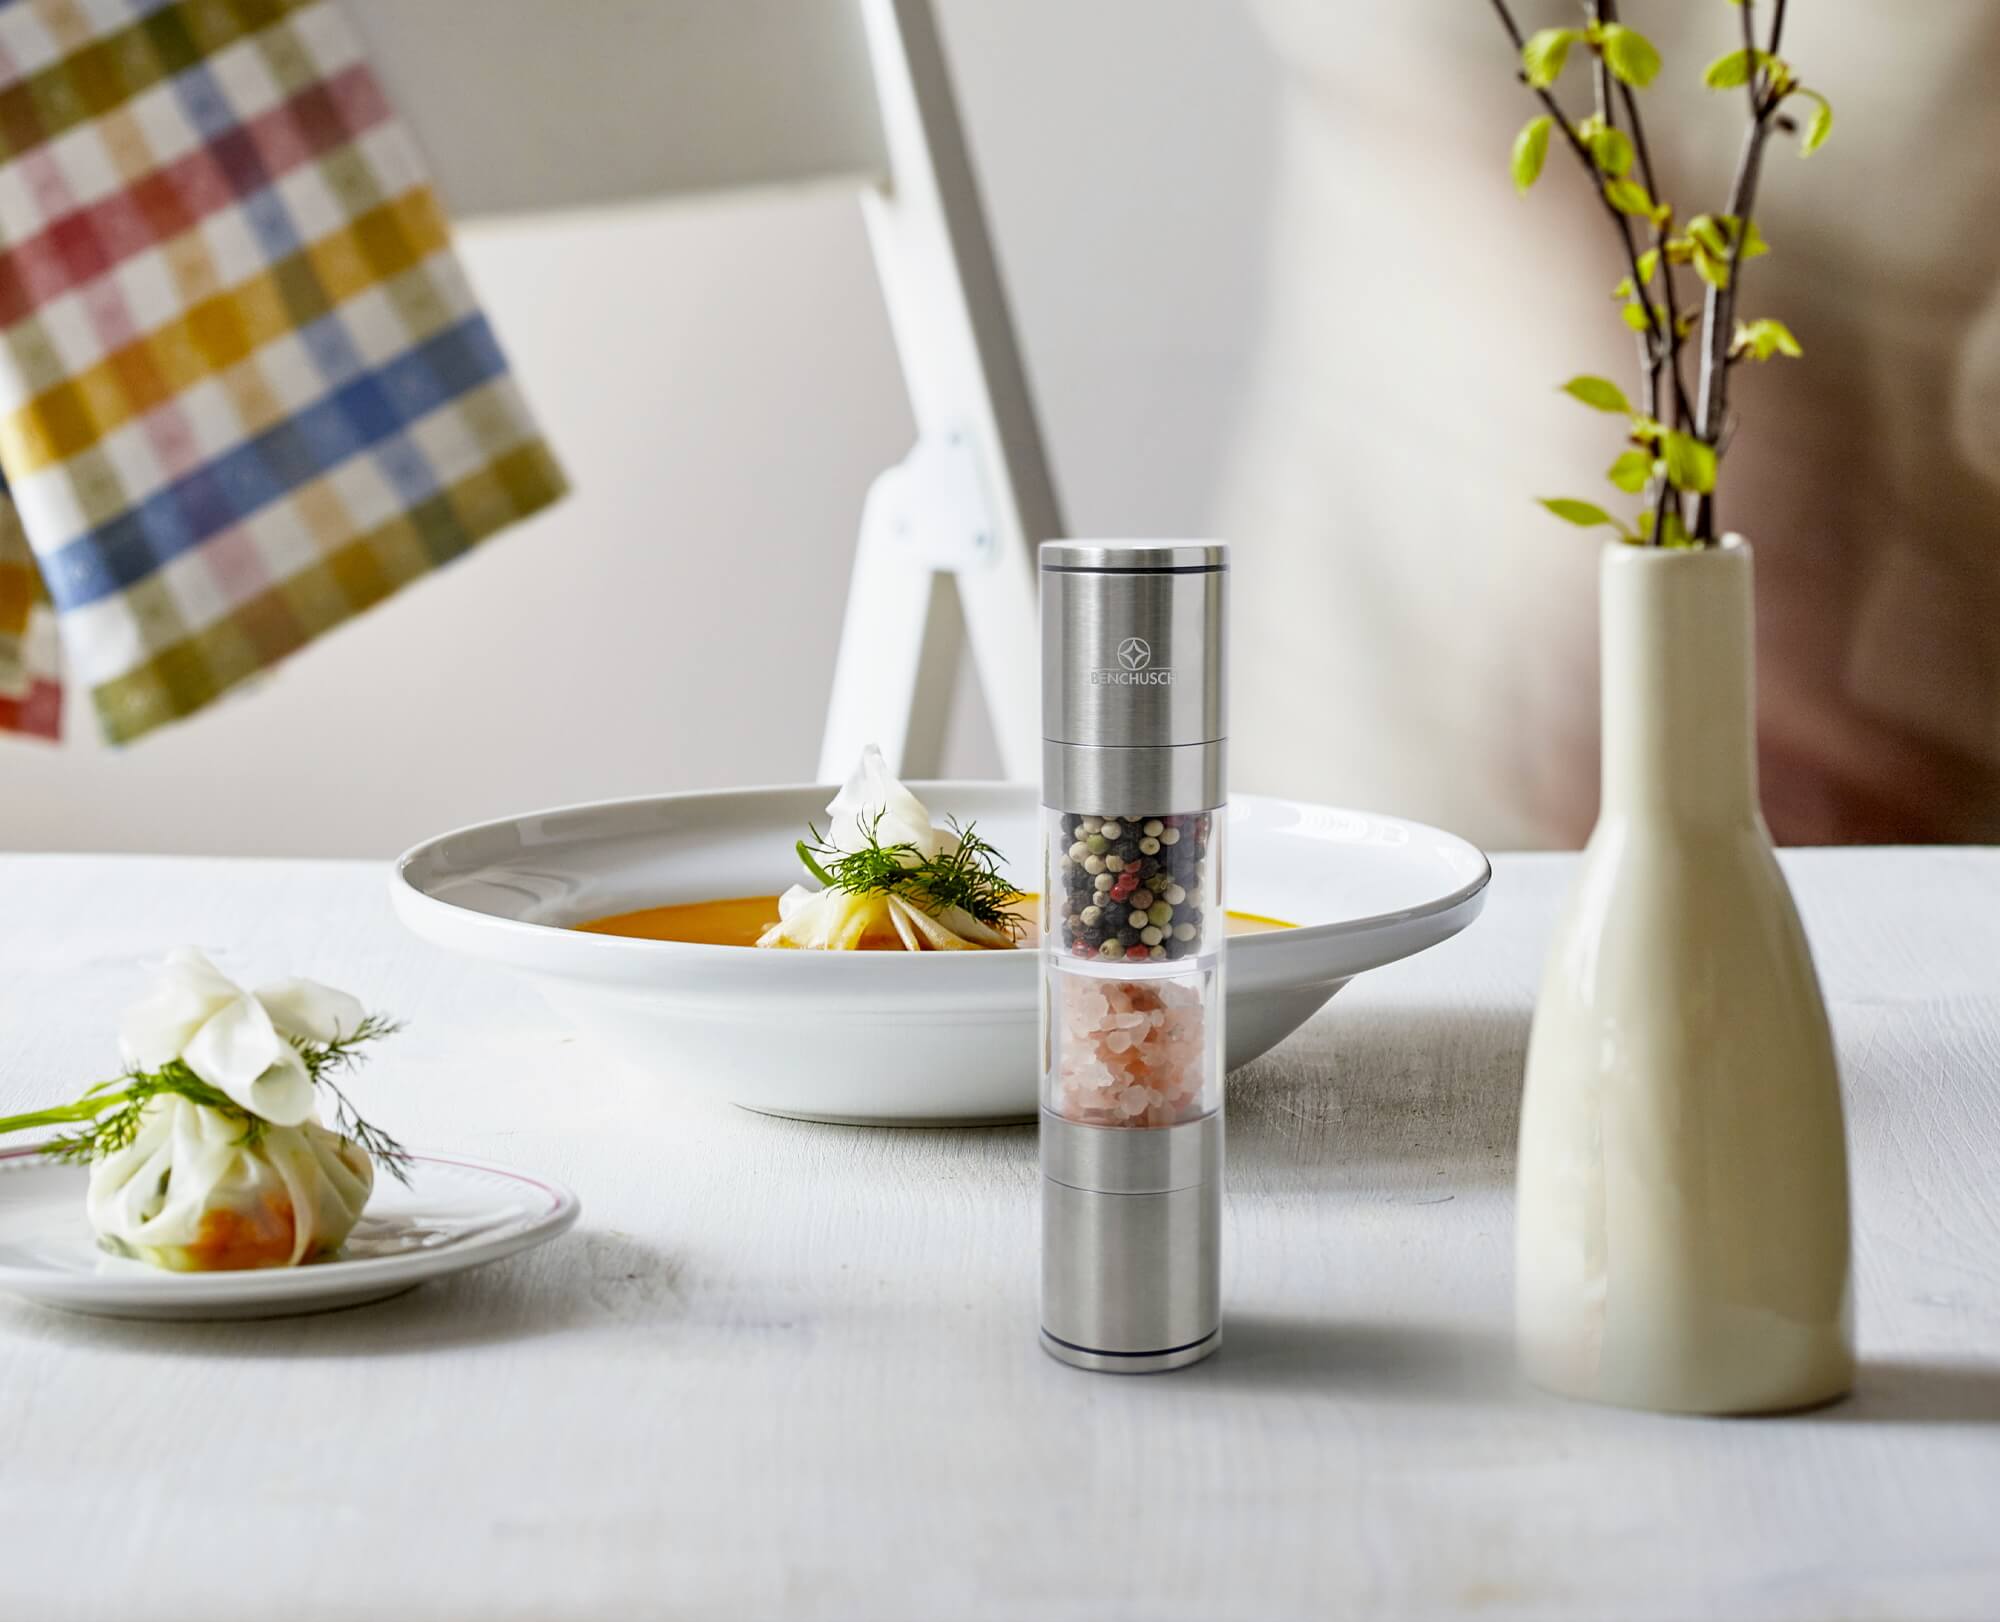 Benchusch Compact 2 in 1 Salt and Pepper Grinder on the dinning table with the orther food